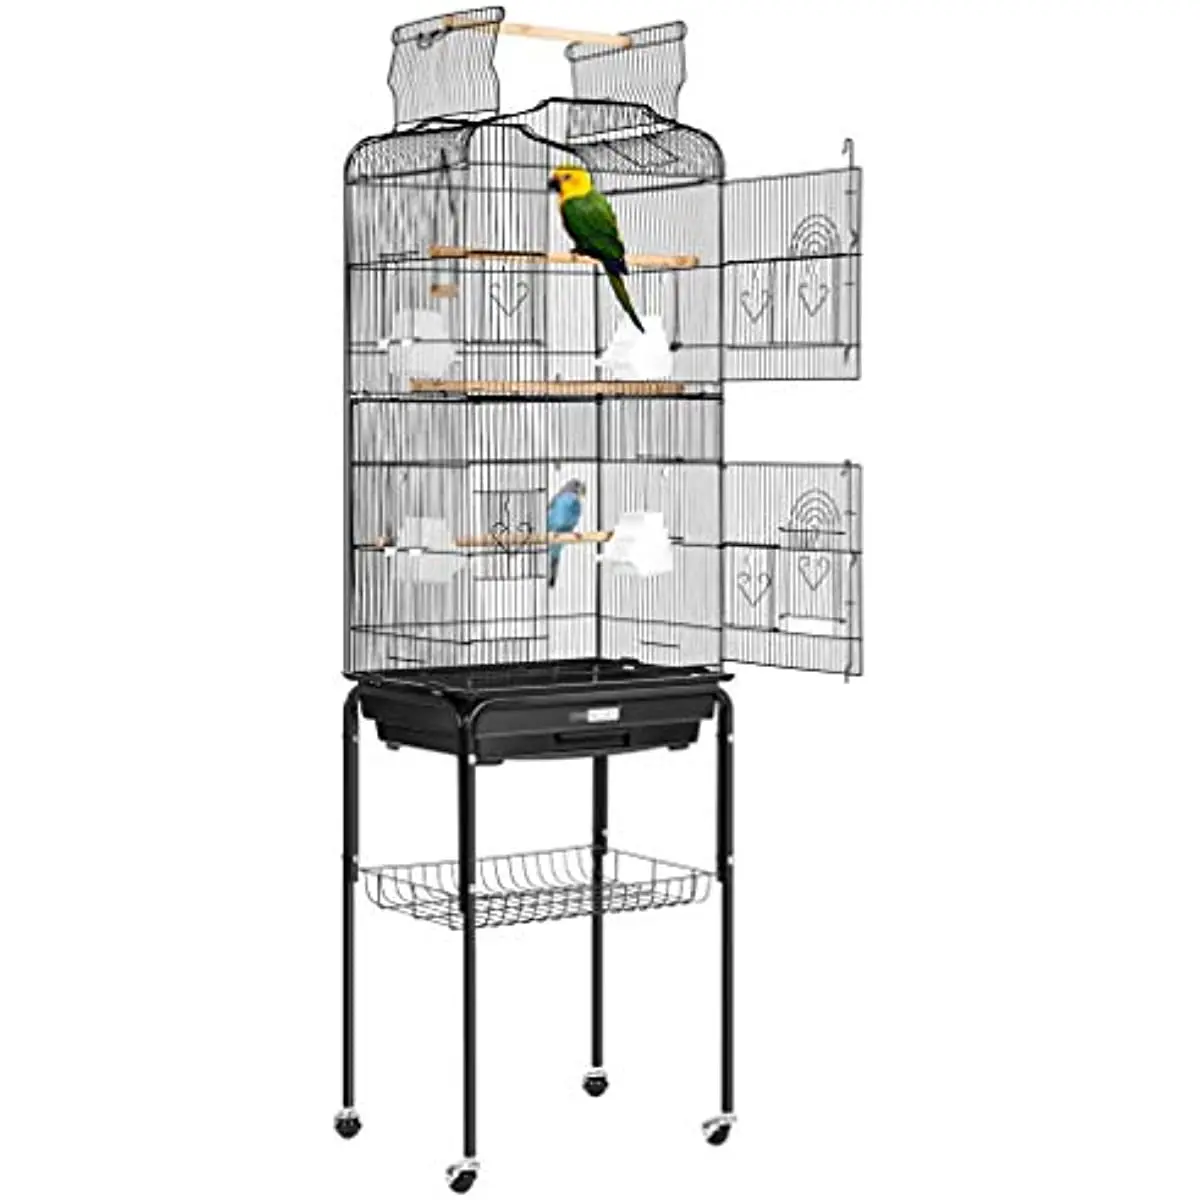 

59.8 Inch Wrought Iron Bird Cage with Play Top and Rolling Stand for Parrots Conures Lovebird Cockatiel Parakeets Black